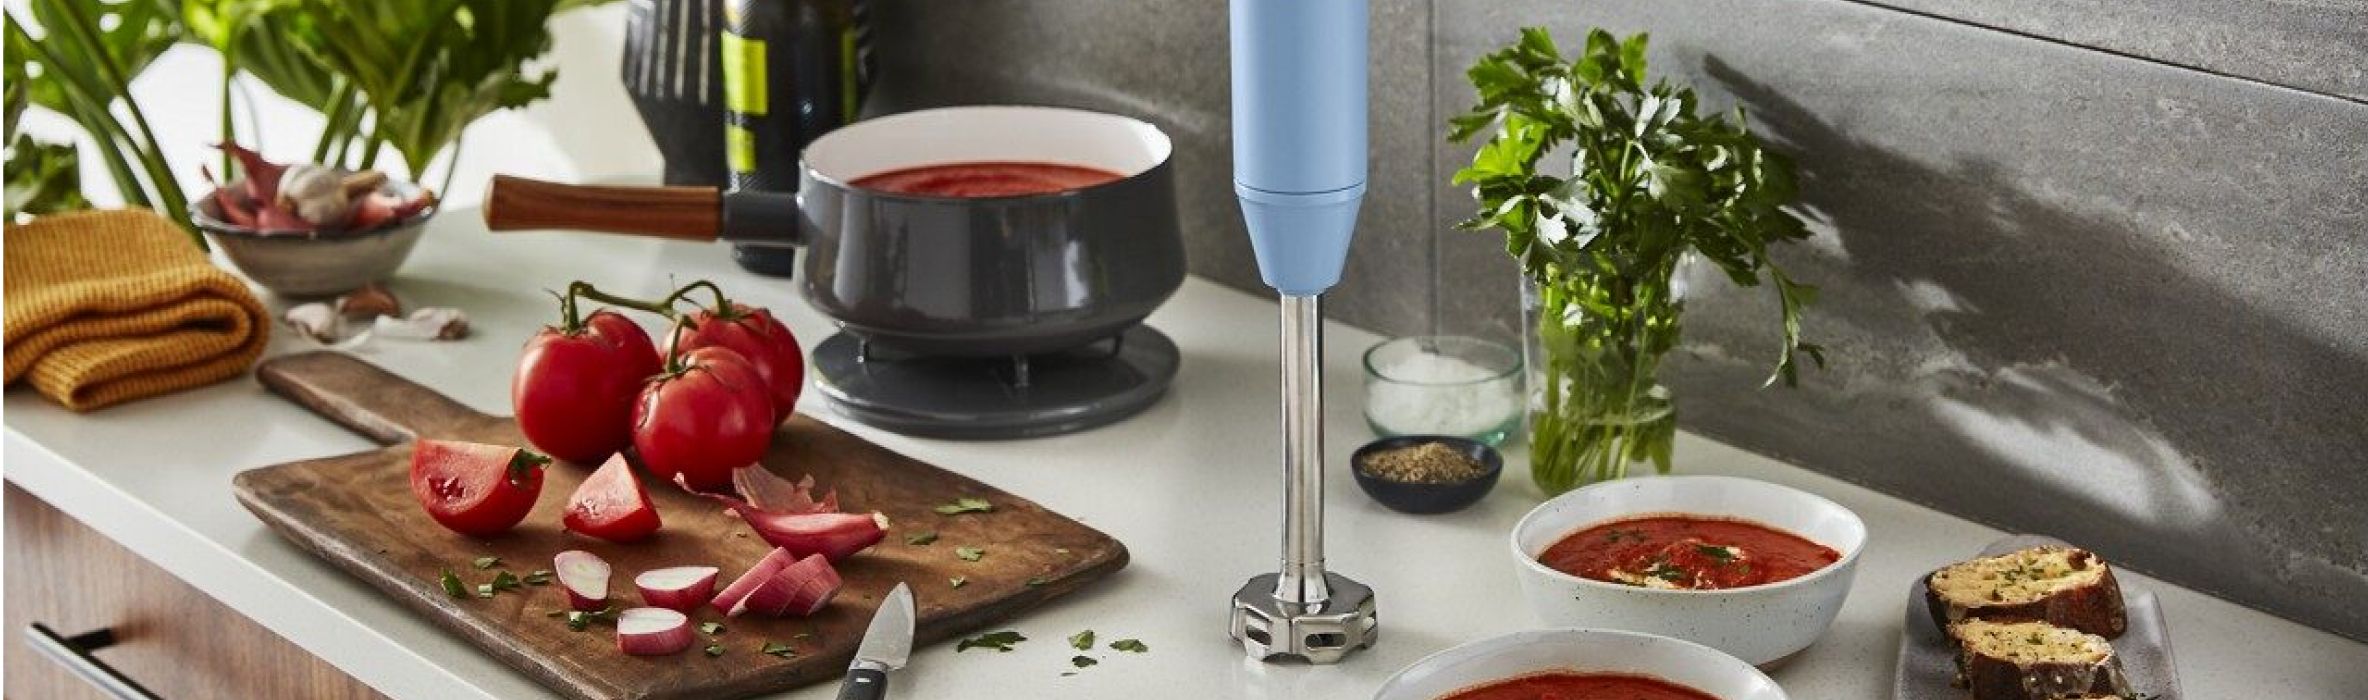 Ingredients for making marinara sauce on a countertop beside a KitchenAid® hand blender.